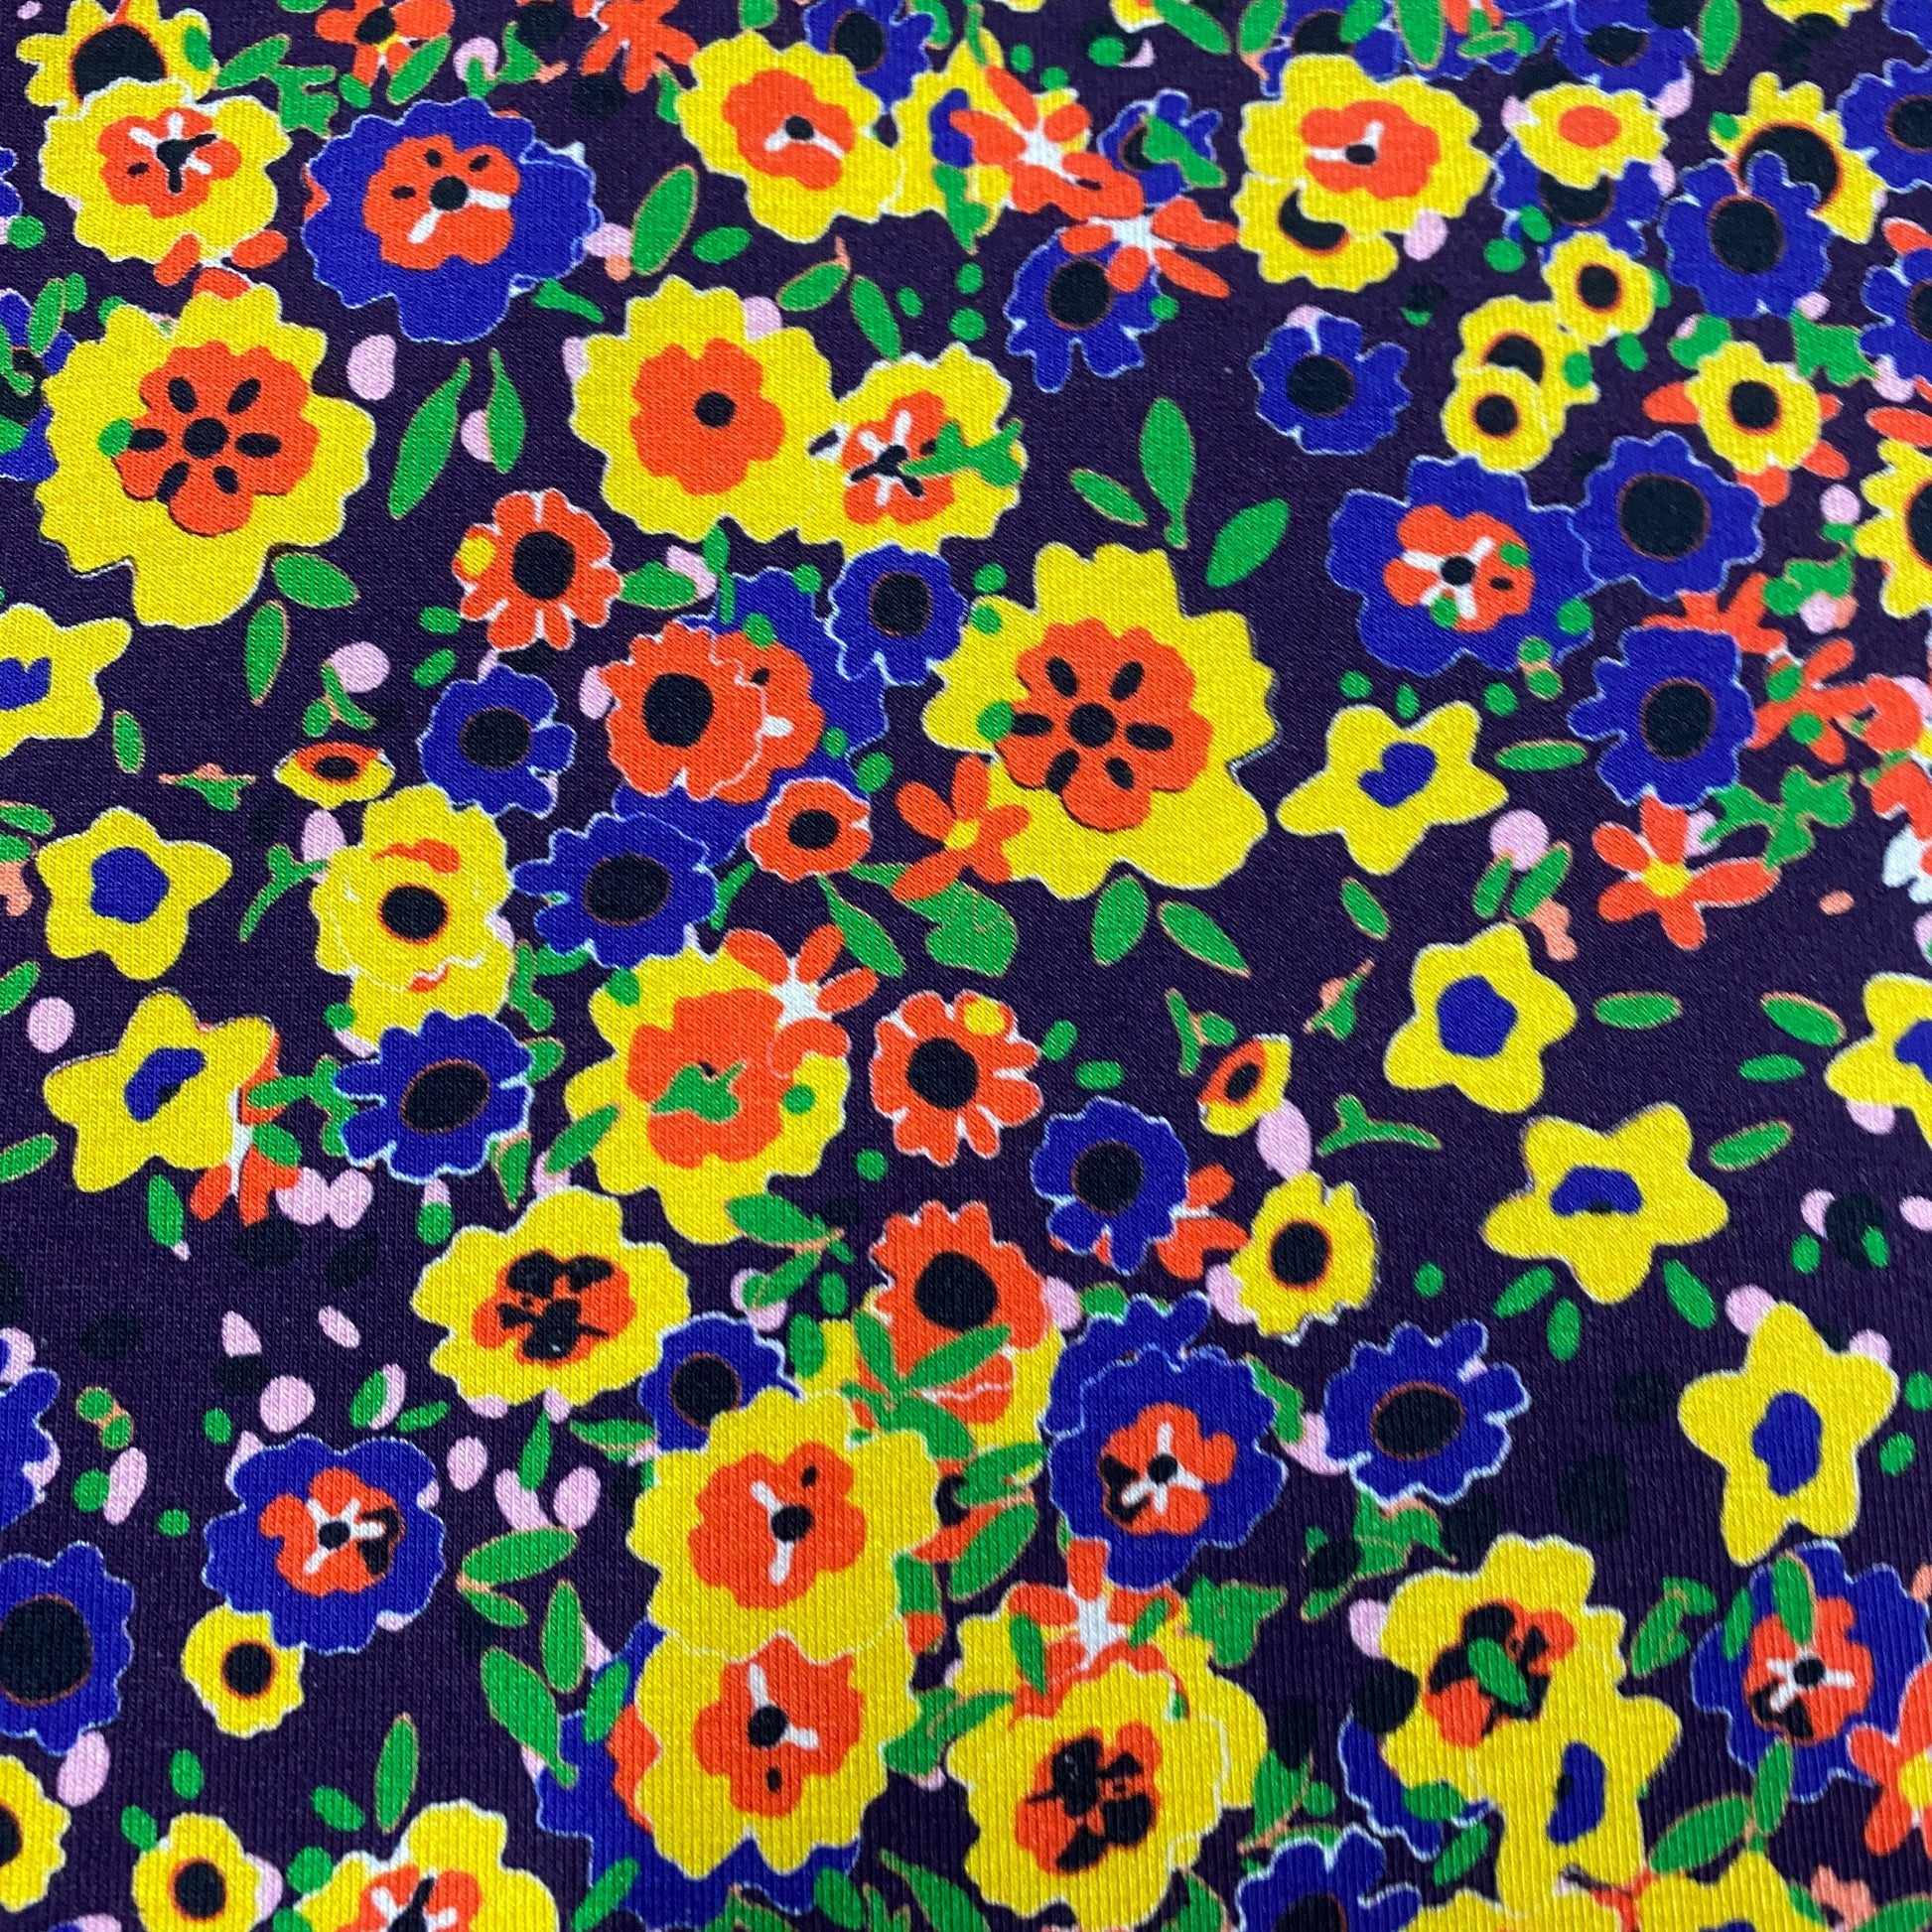 Gold and Purple Flowers on Bamboo/Spandex Jersey Fabric - Nature's Fabrics